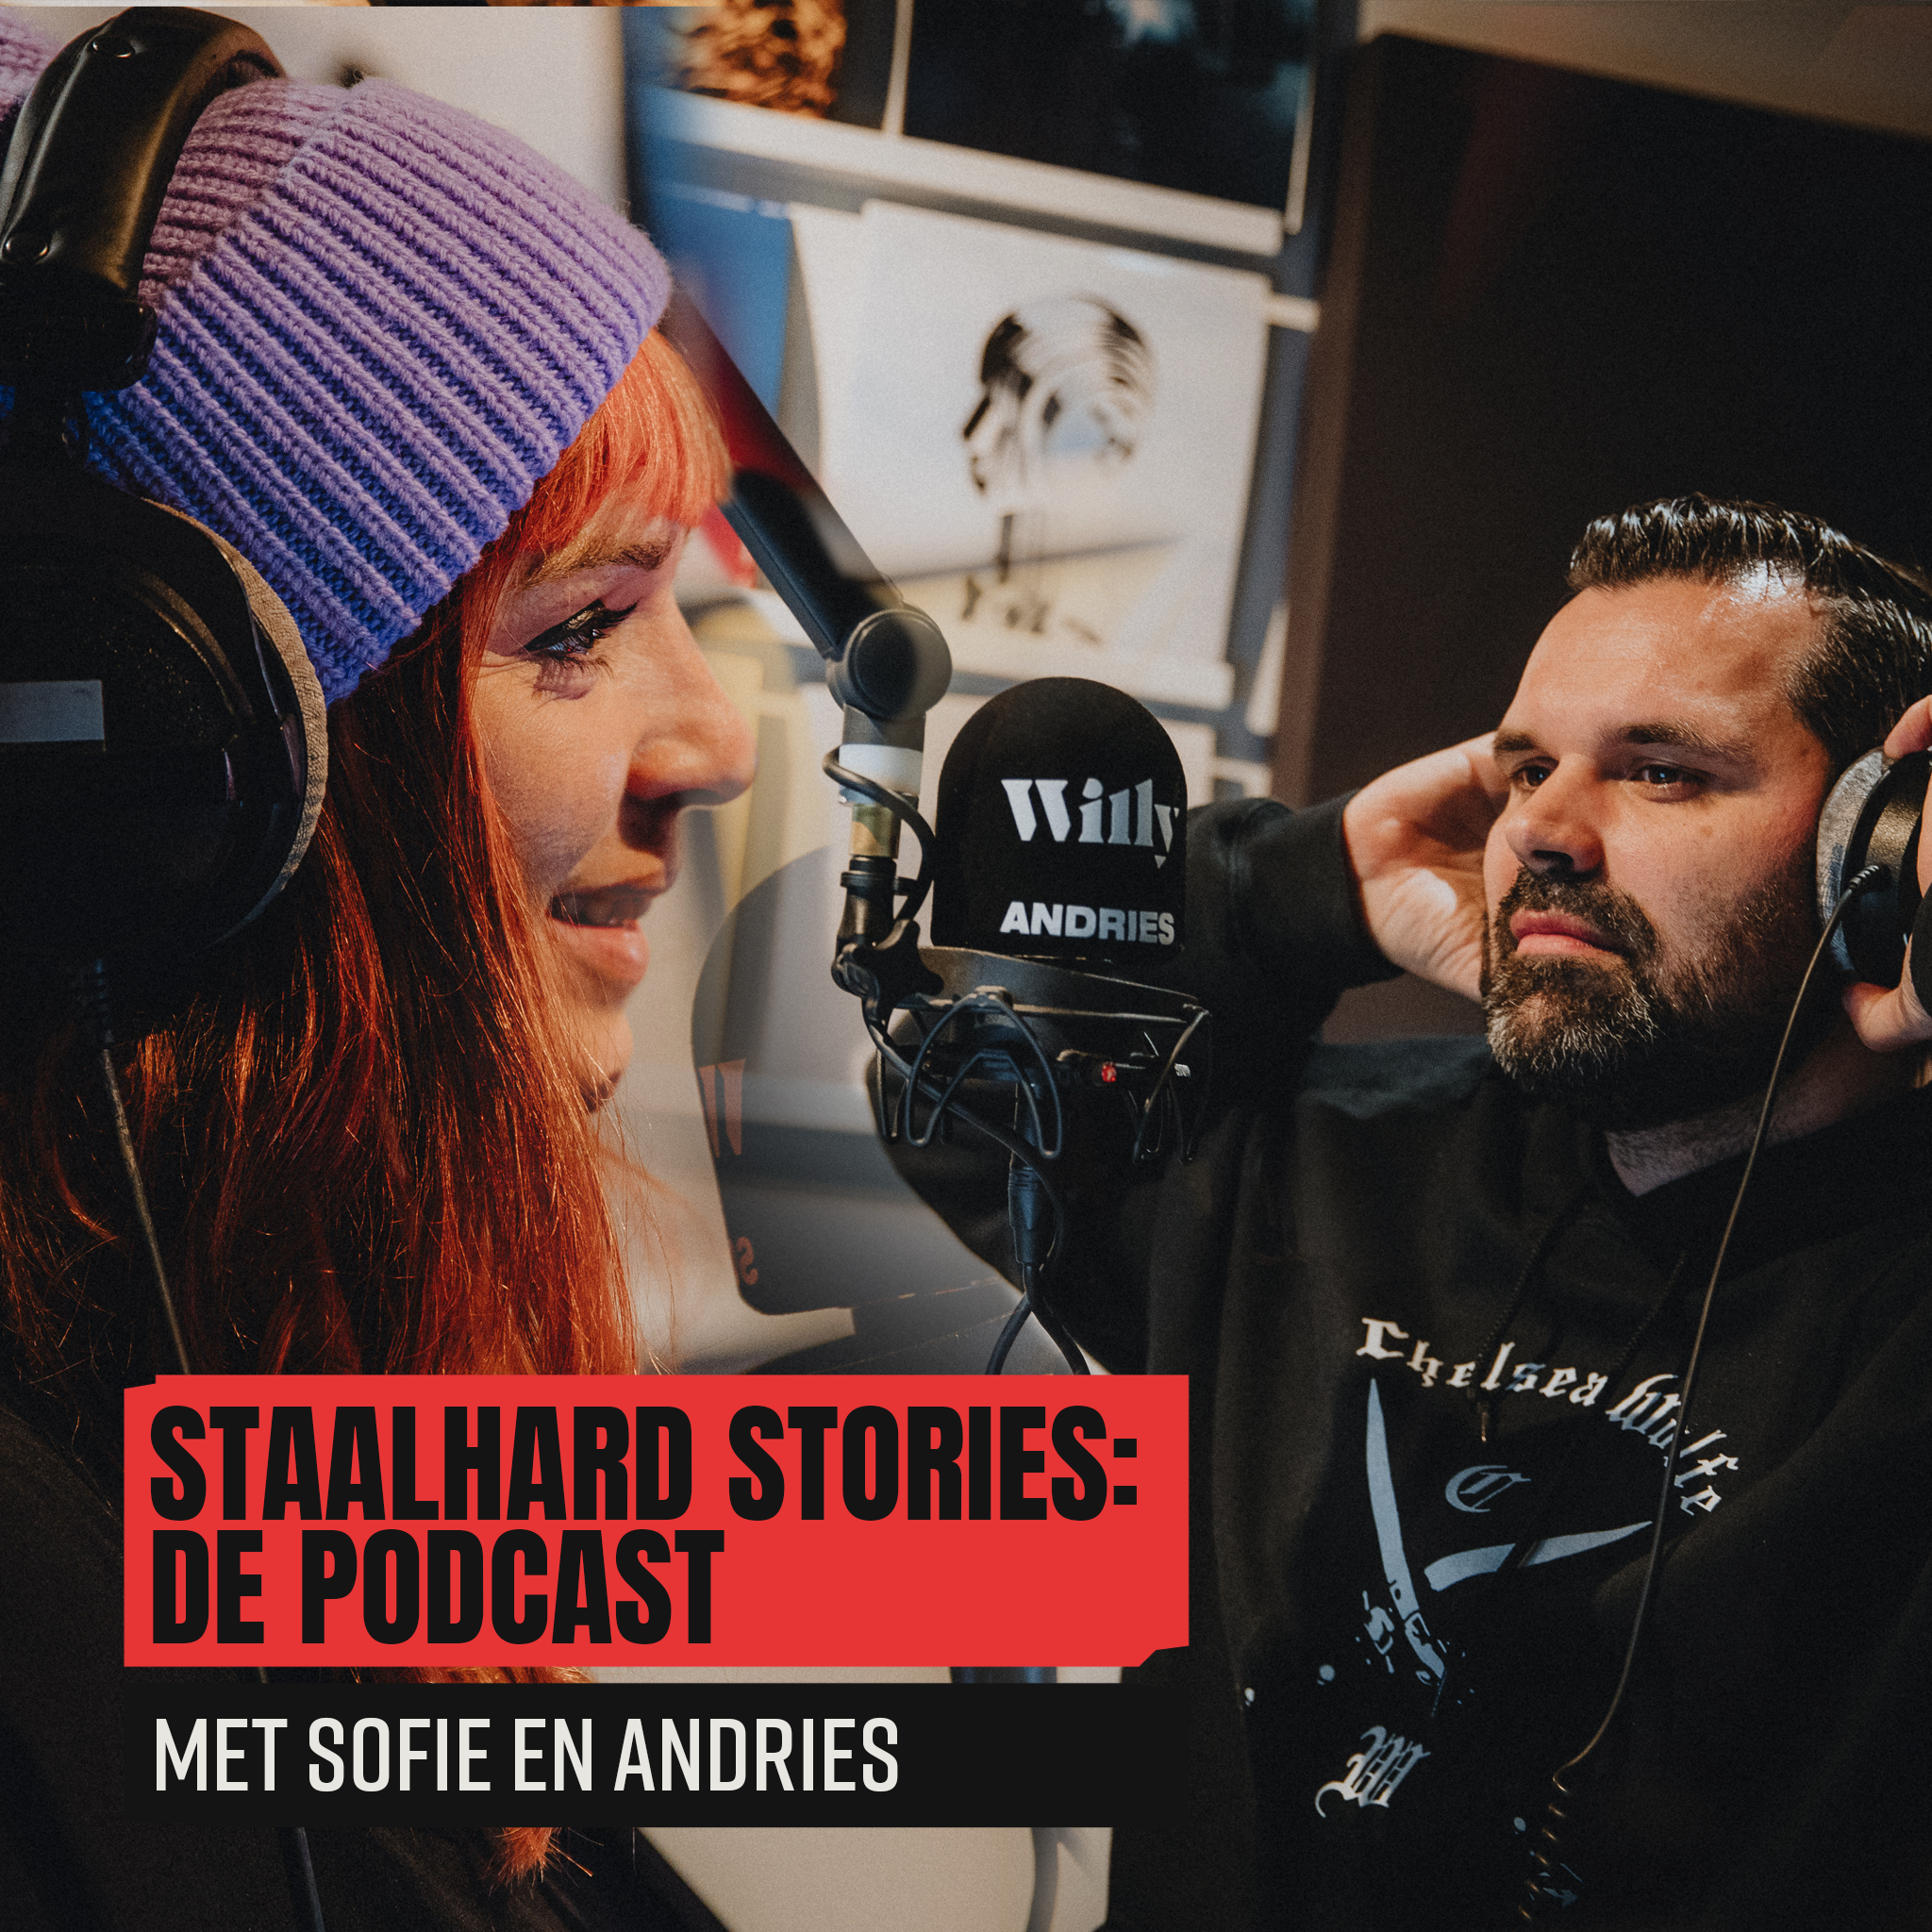 Willy Talks: Staalhard Stories 1 (2020)